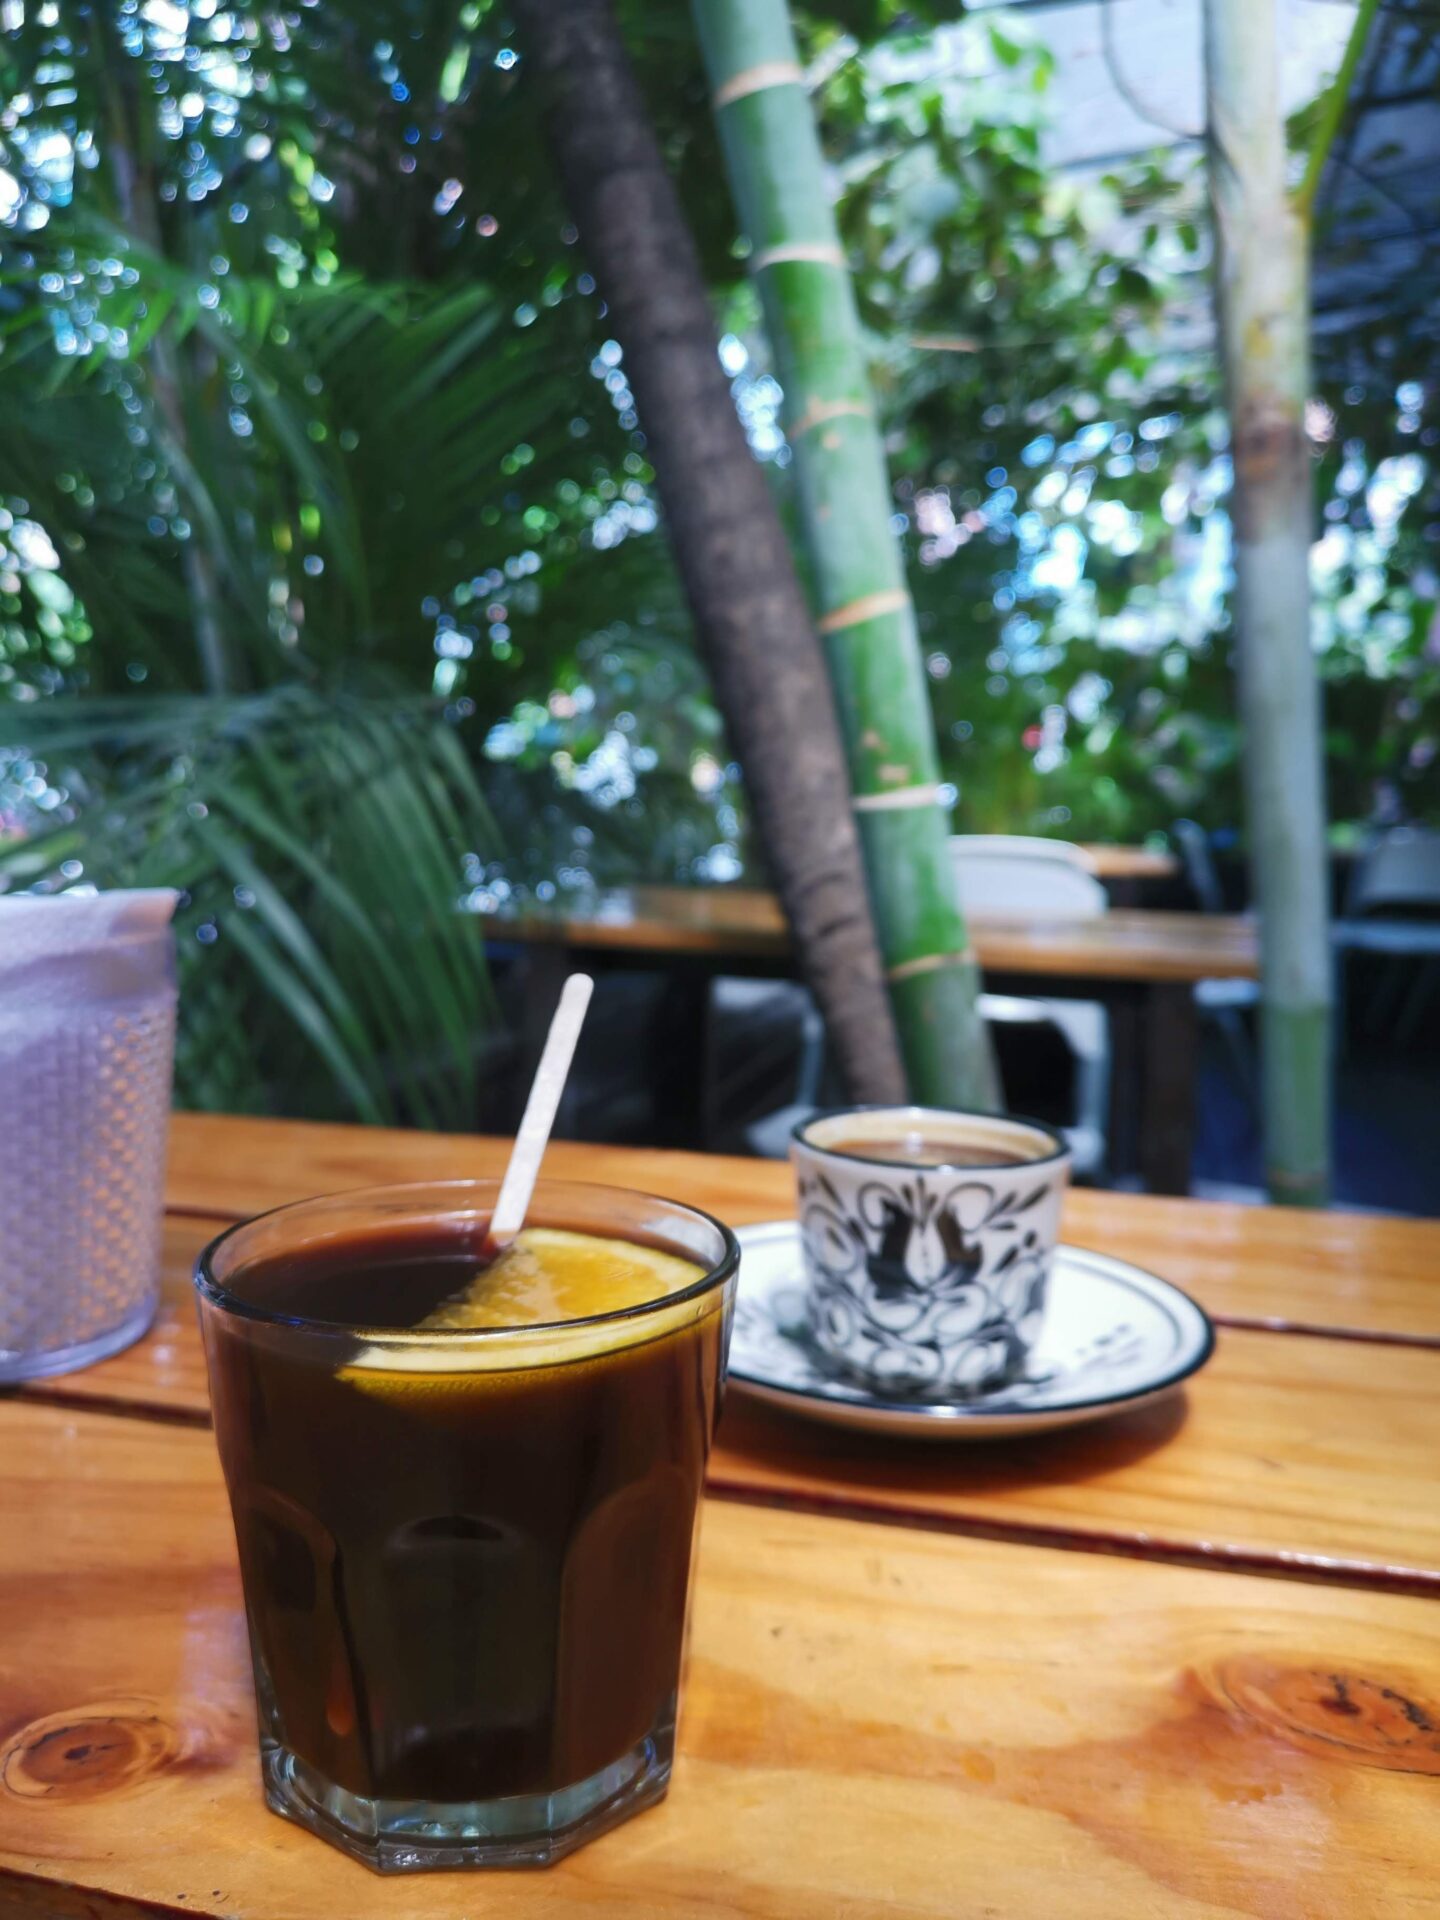 An iced coffee with a slice of orange sitting in it and a black and white coffee mug sitting on the table behind it